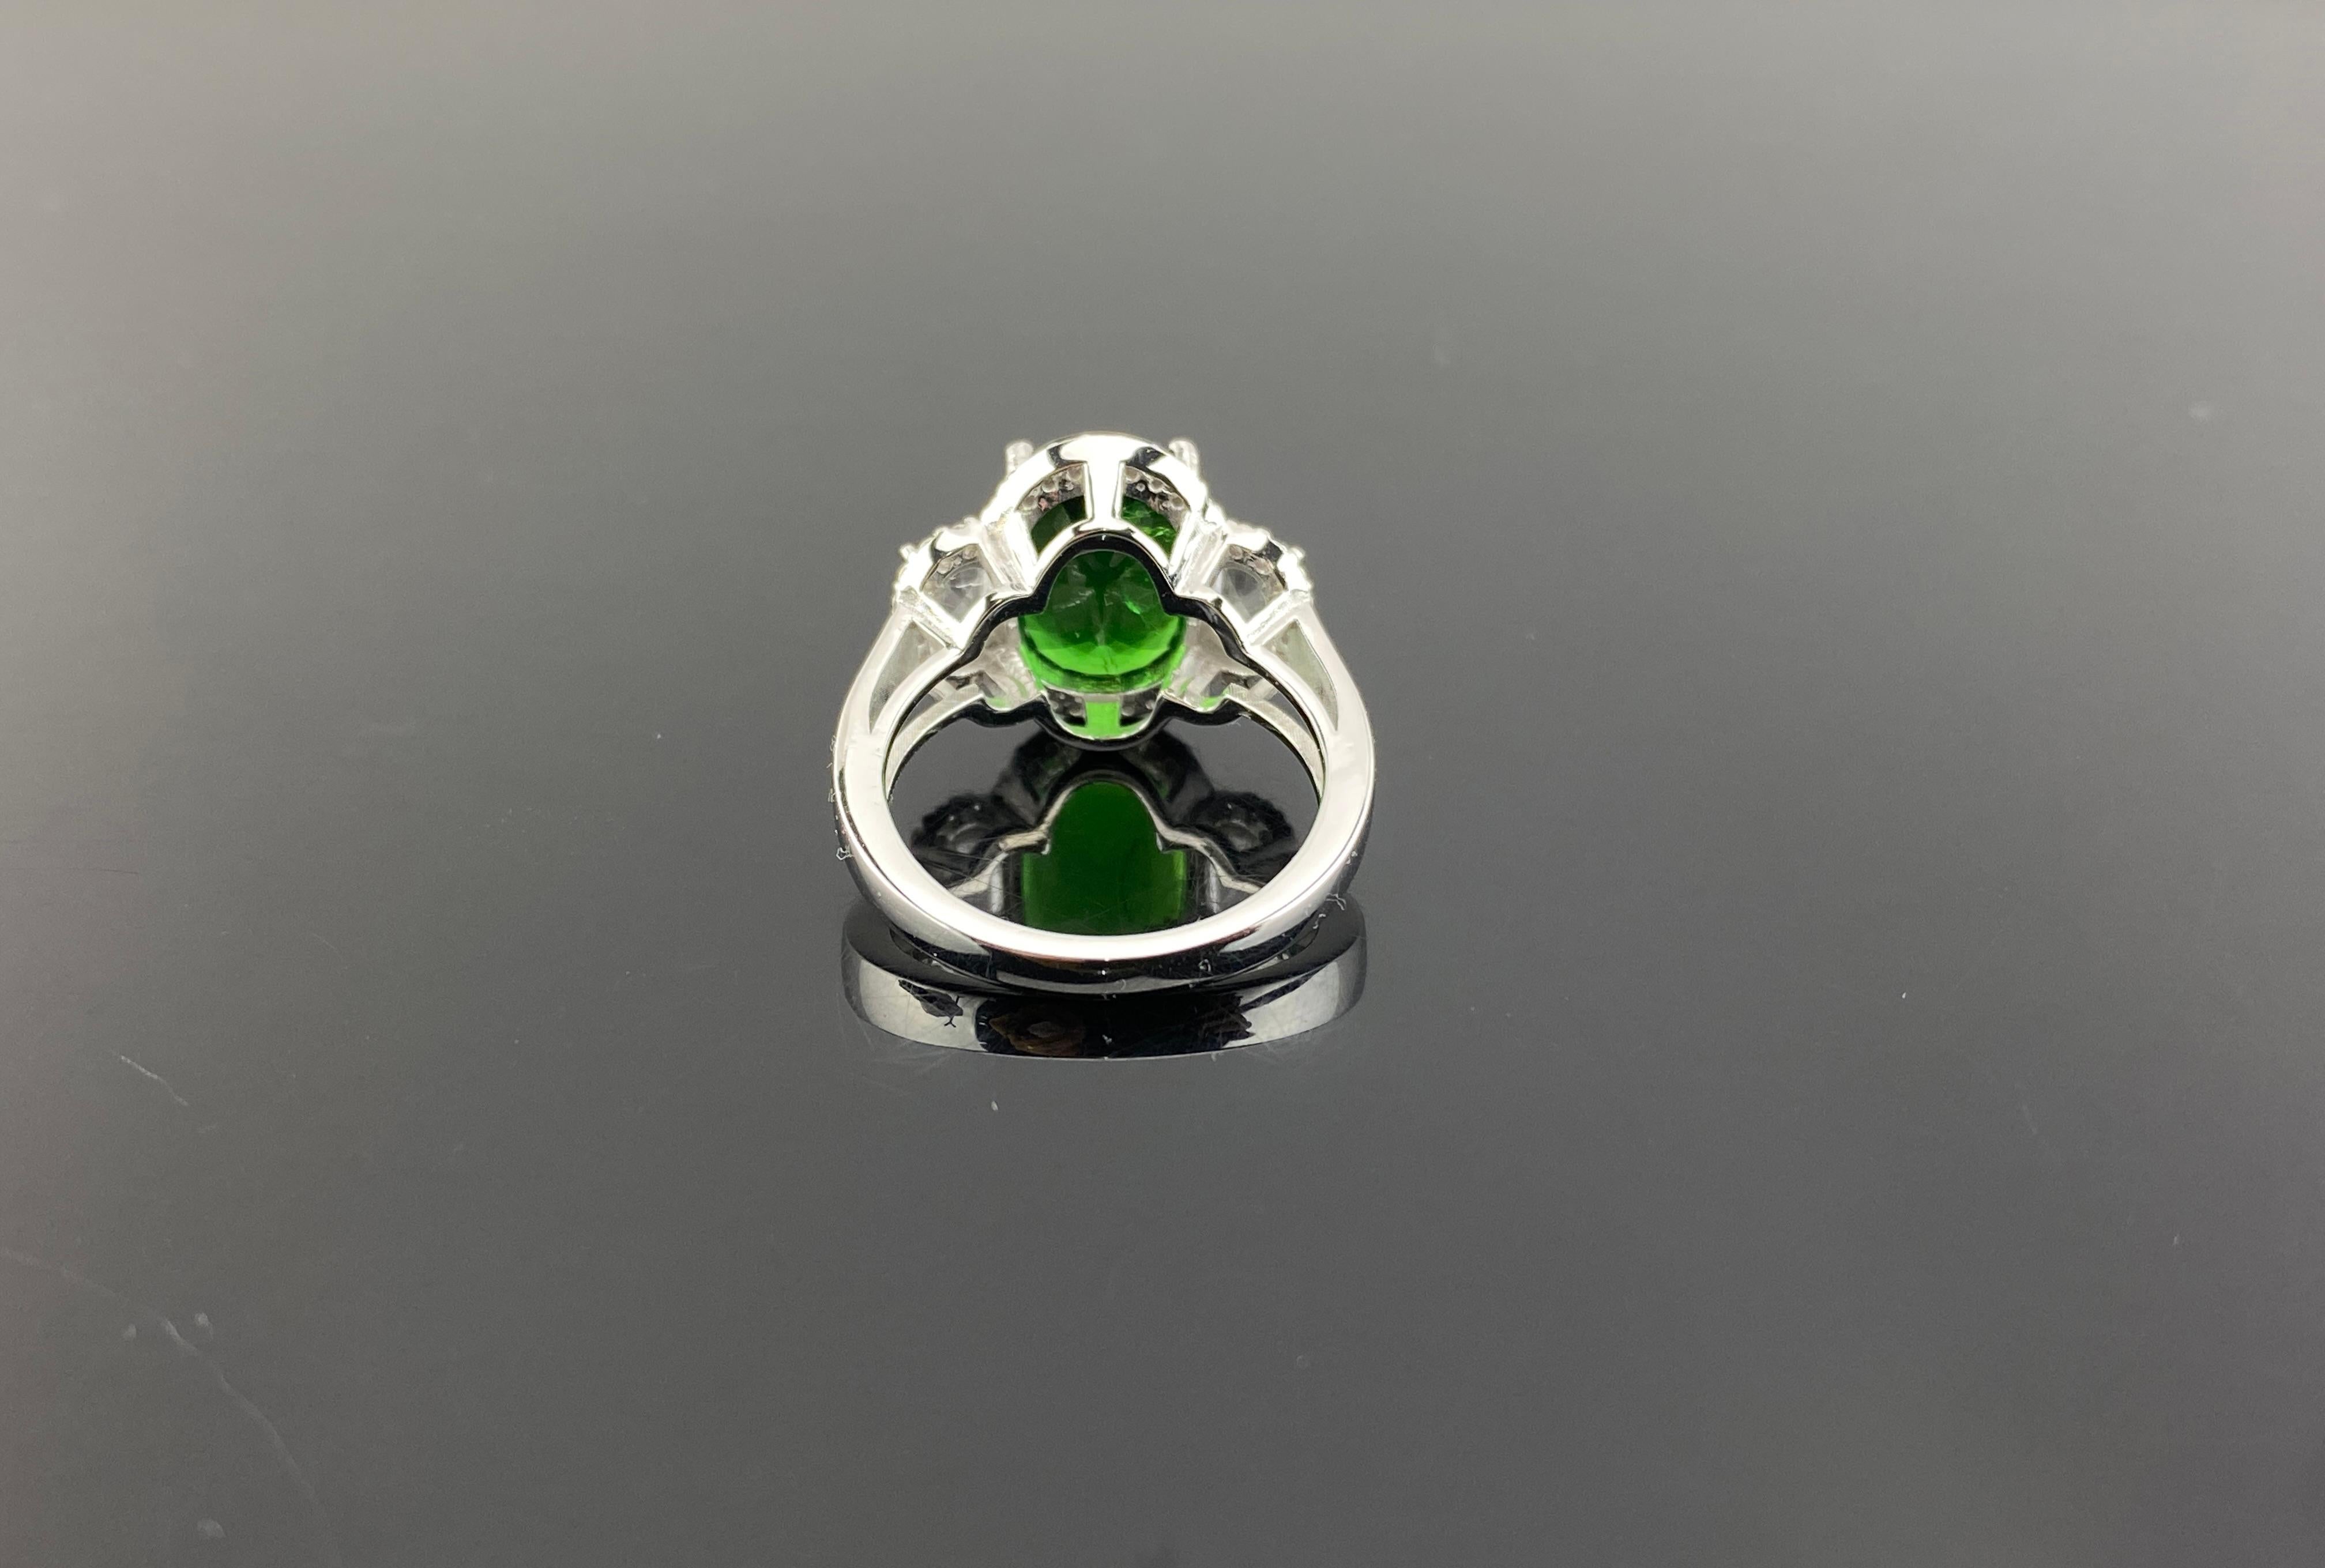 This bright, gorgeous green tsavorite garnet, named after Tsavo Park in Kenya, takes center stage in an elegant cocktail ring that will make you feel special every time you wear it. Set in 6.44 grams of 18k white gold with 2 rose cuts flanked on